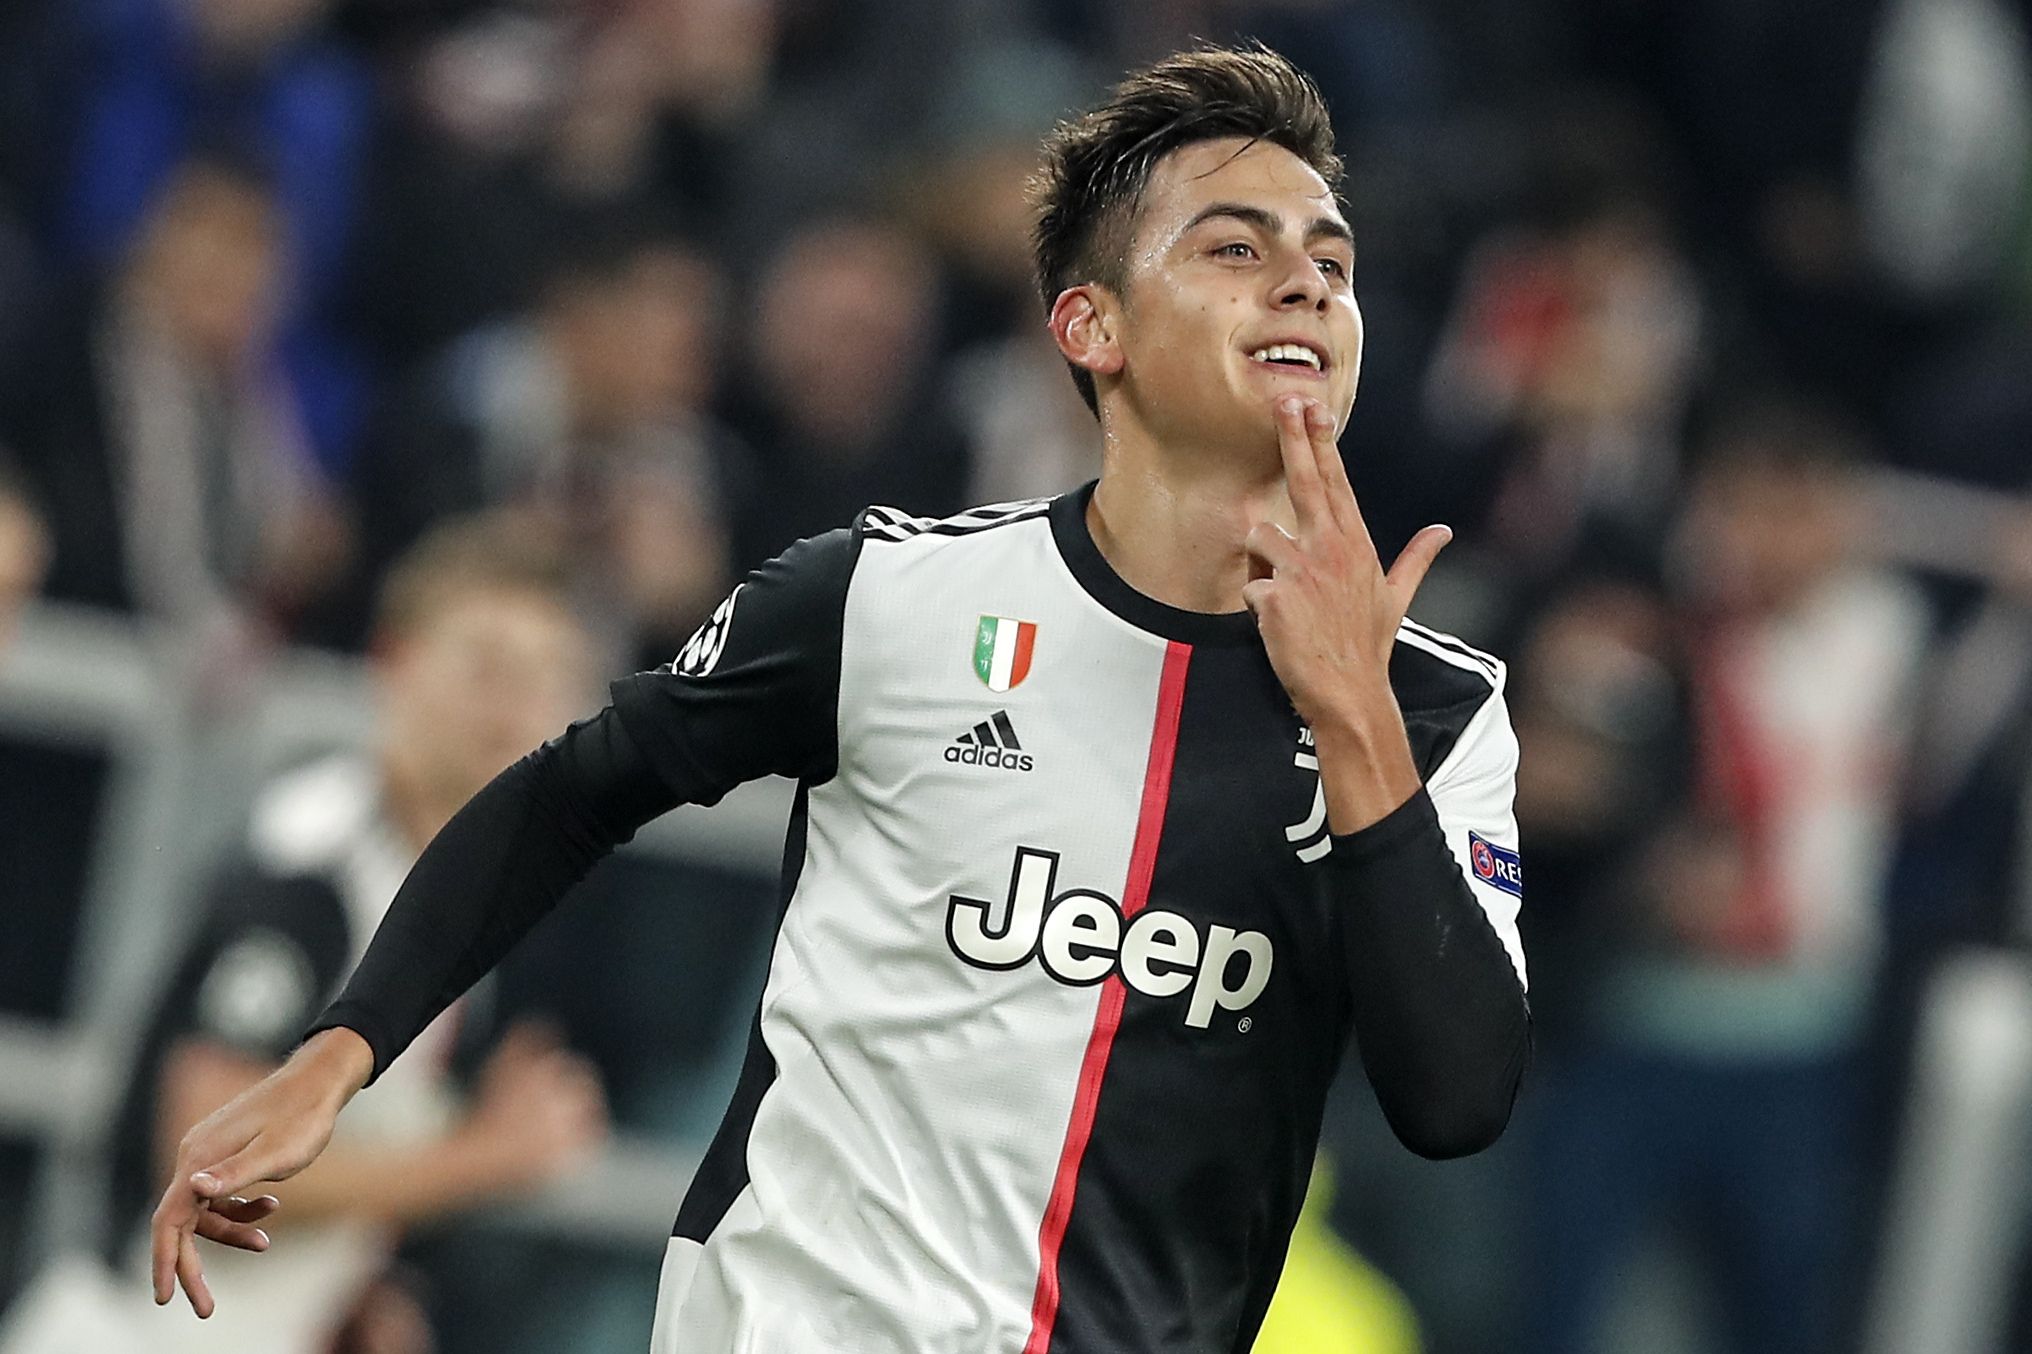 Juventus' Paulo Dybala Tests Positive for Coronavirus, Is in 'Perfect Condition'. Bleacher Report. Latest News, Videos and Highlights